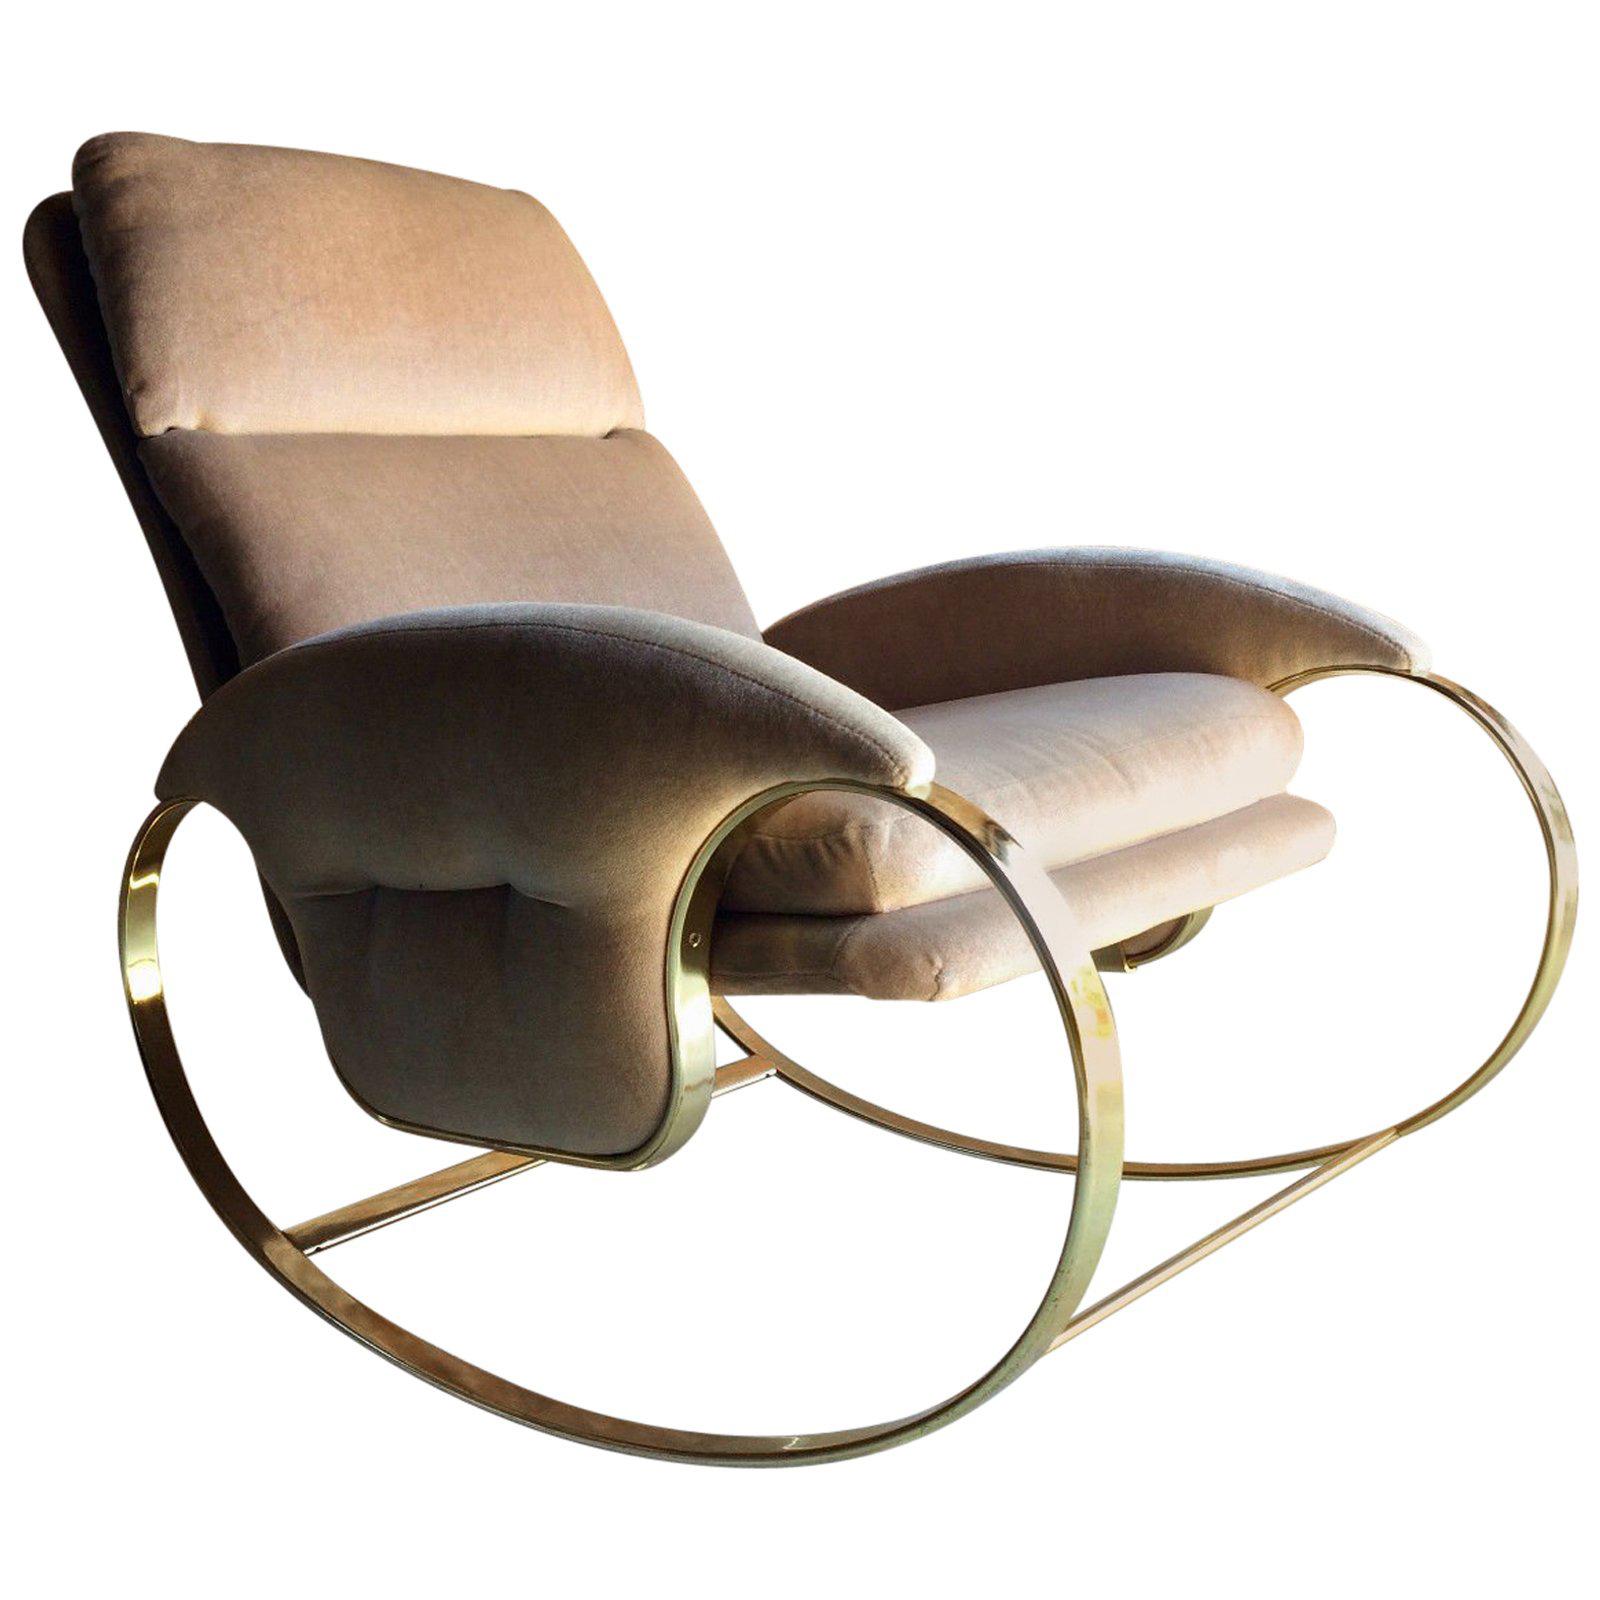 A stunning iconic 1970s Italian design Guido Faleschini gilded rocking chair, armchair, raised on stunning scroll worked frame with beige velour upholstered seat and backrest, the chair is offered in superb condition.